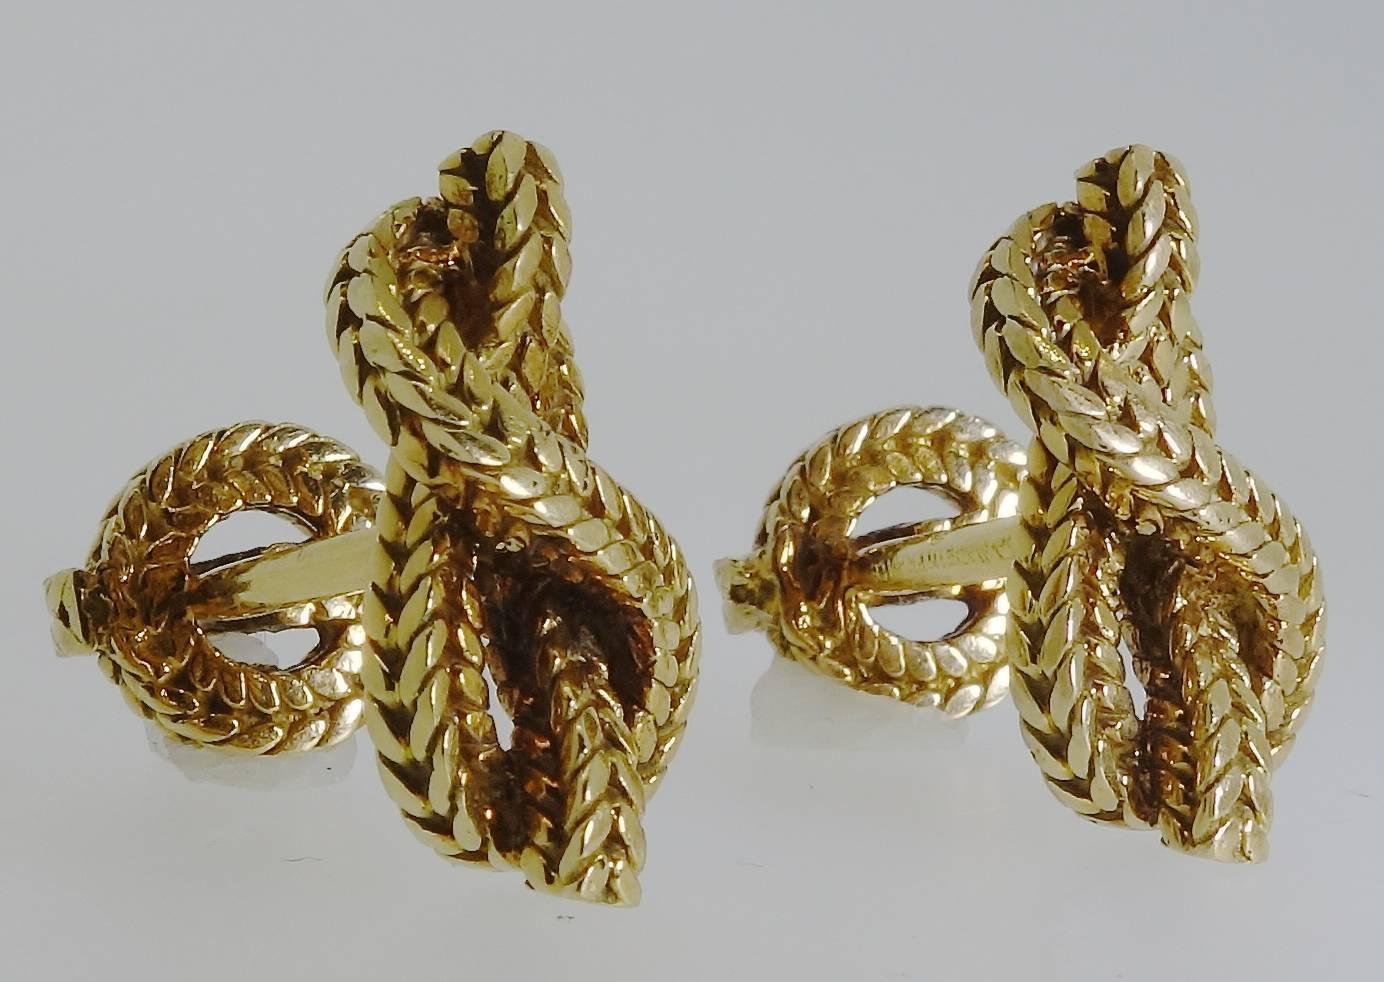 Signed and numbered and with French hallmarks, these love knot 18K cufflinks by the famous French firm of Van Cleef & Arpels weigh 24.16 grams.  Circa 1960.